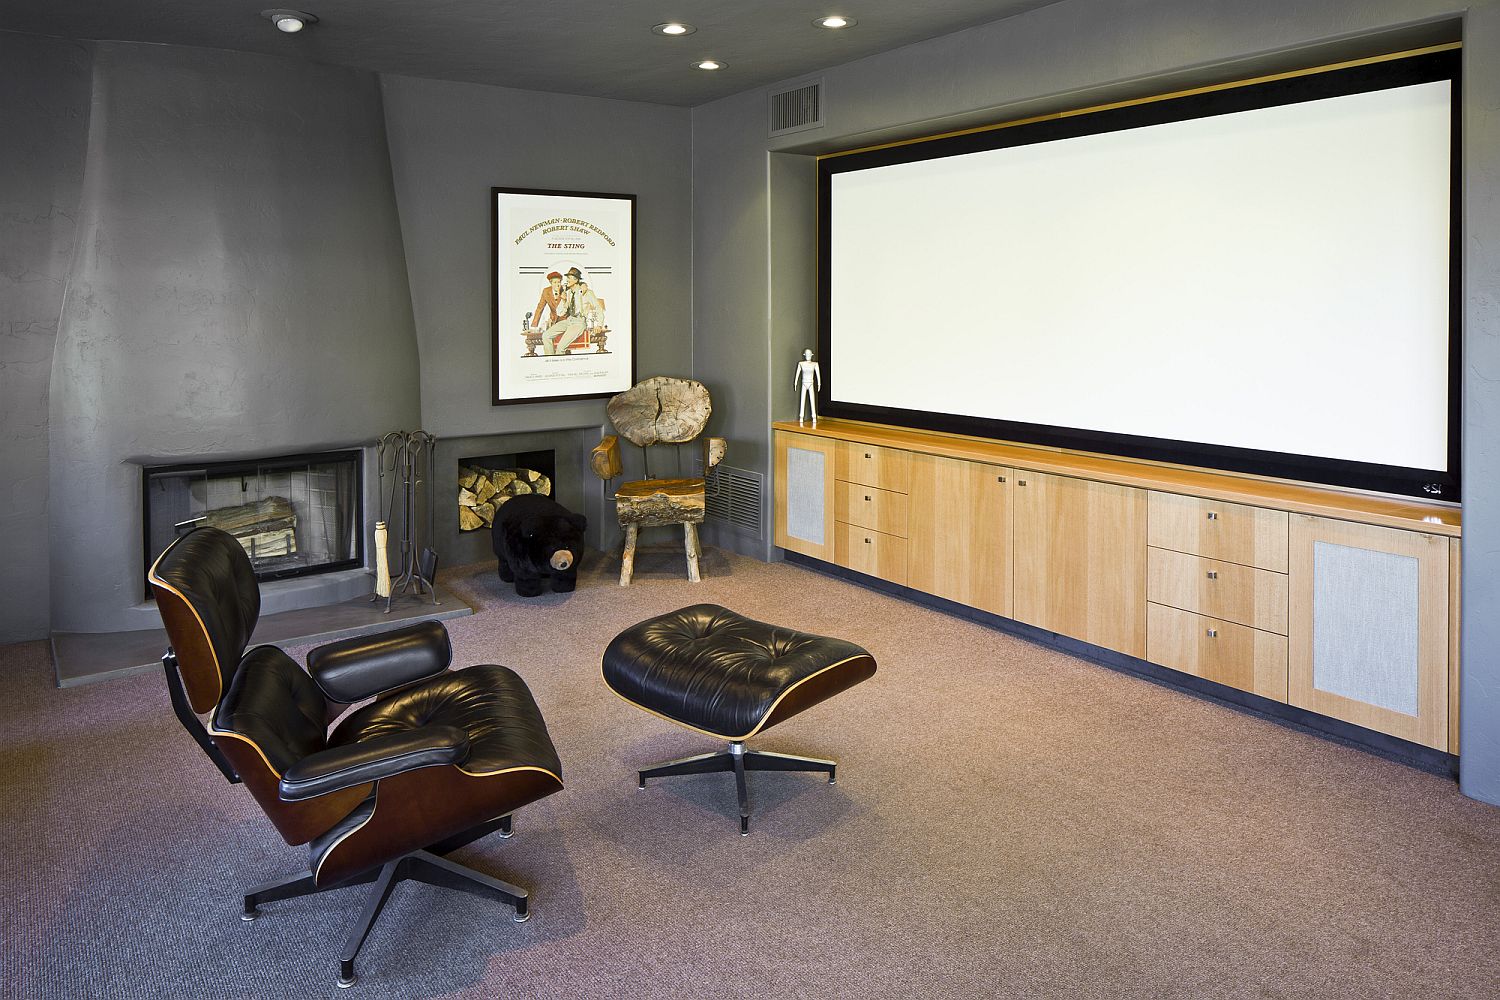 Media-room-with-a-fireplace-and-a-relaxing-lounger